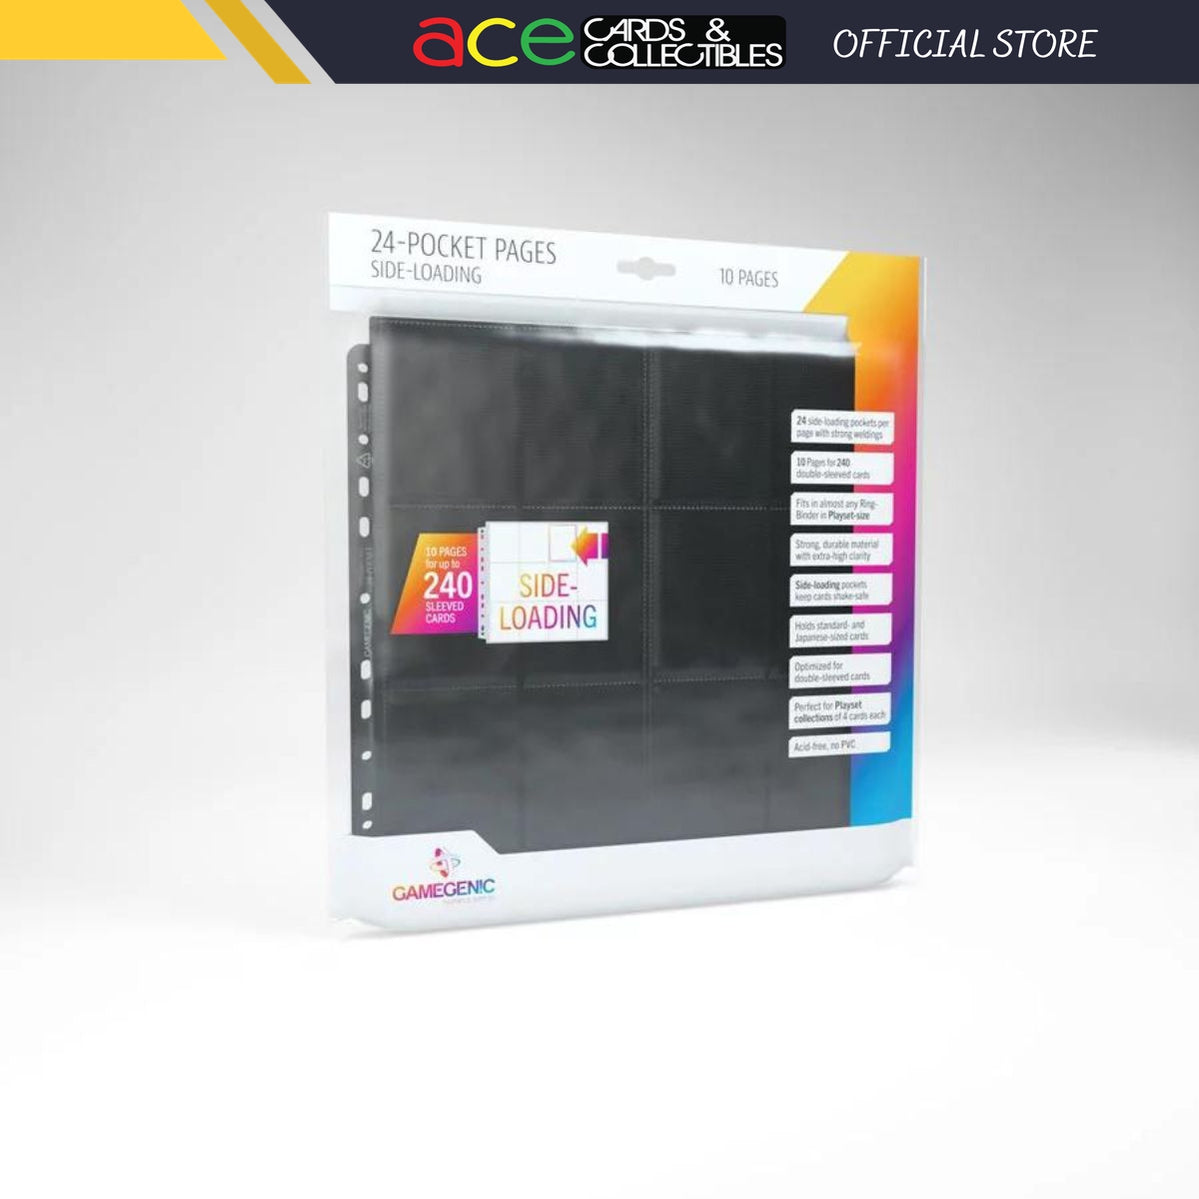 Gamegenic Page "24-Pocket Pages Side-loading (10 pages bag)"-Gamegenic-Ace Cards & Collectibles